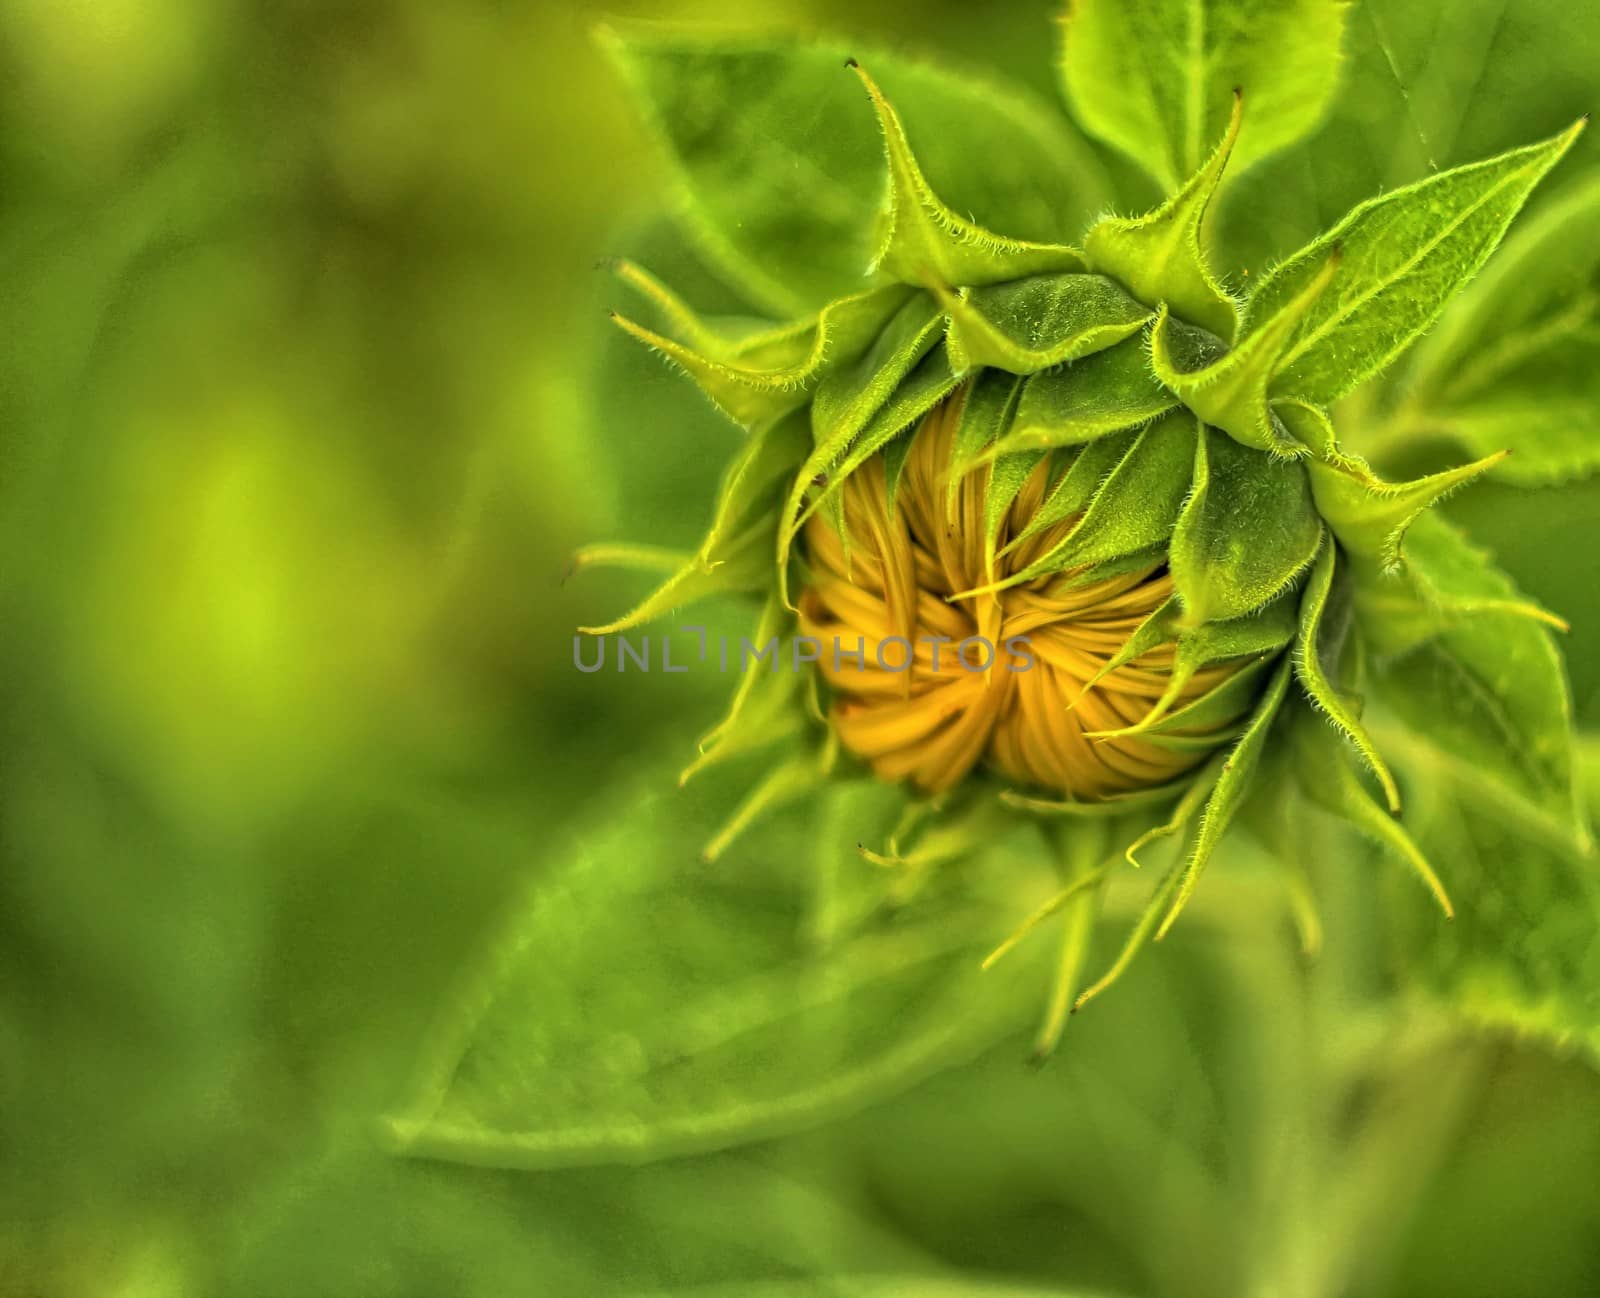 Sunflower surrounded by green leaves